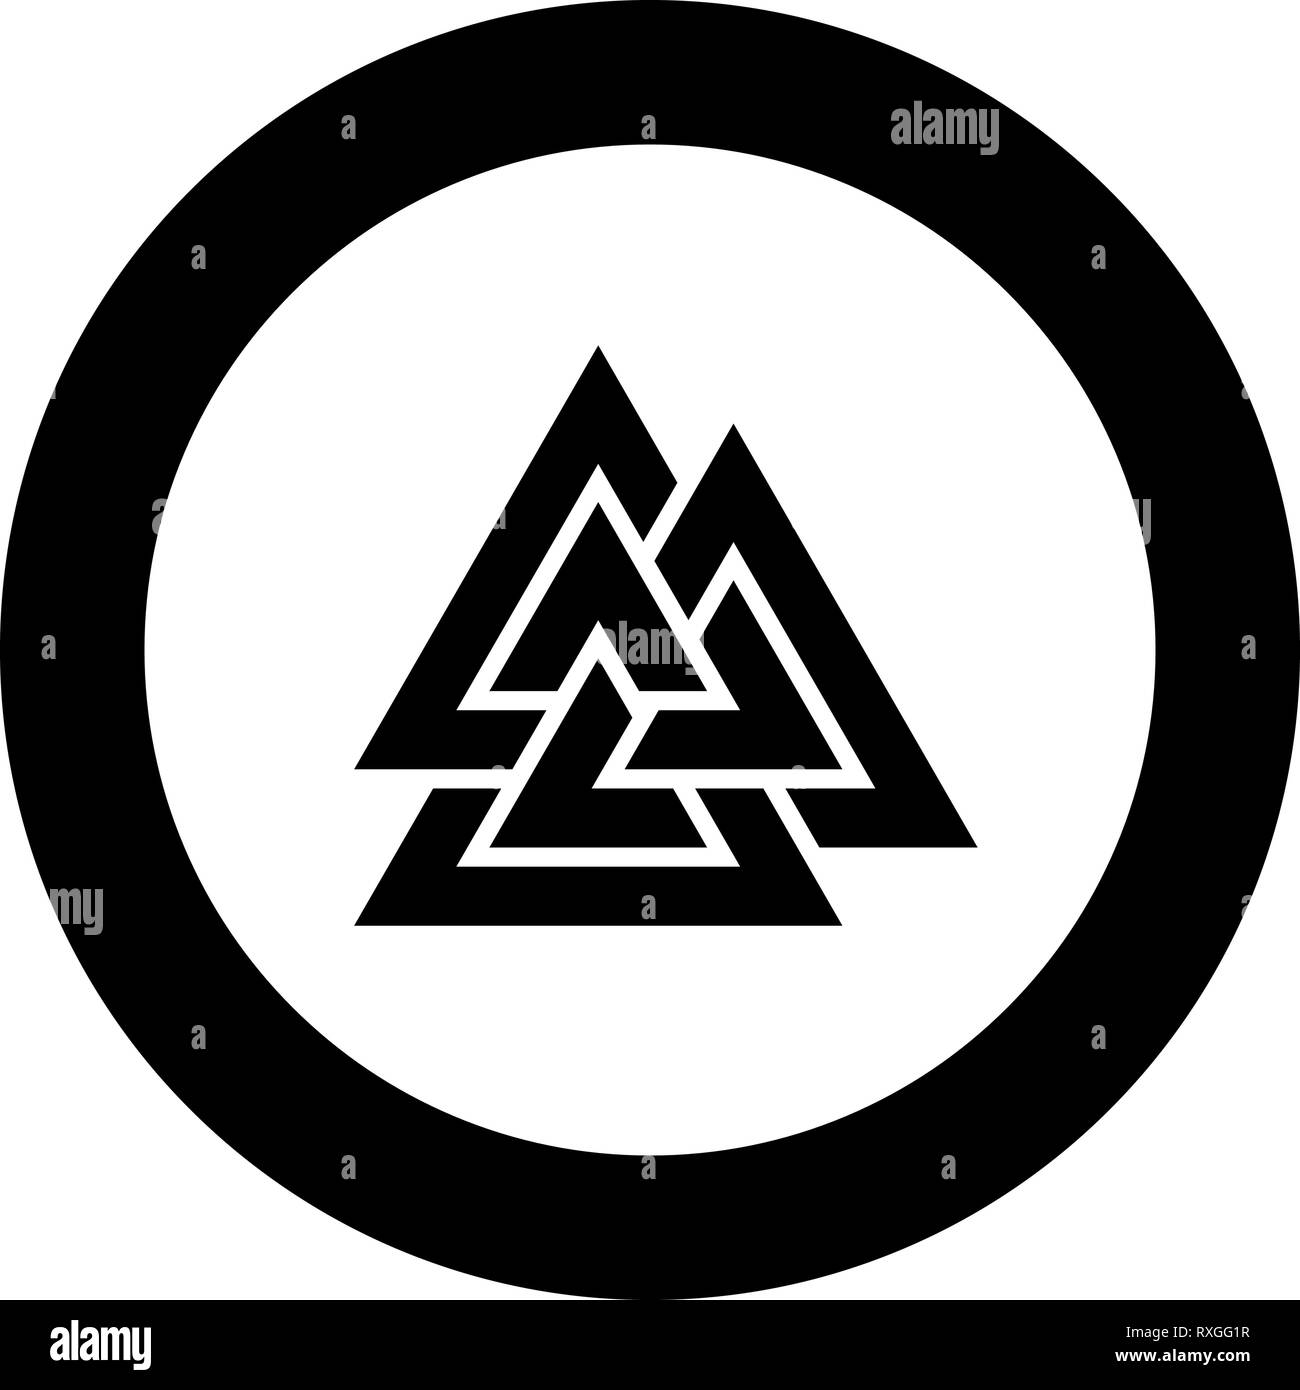 Valknut sign symblol icon black color vector in circle round illustration flat style simple image Stock Vector